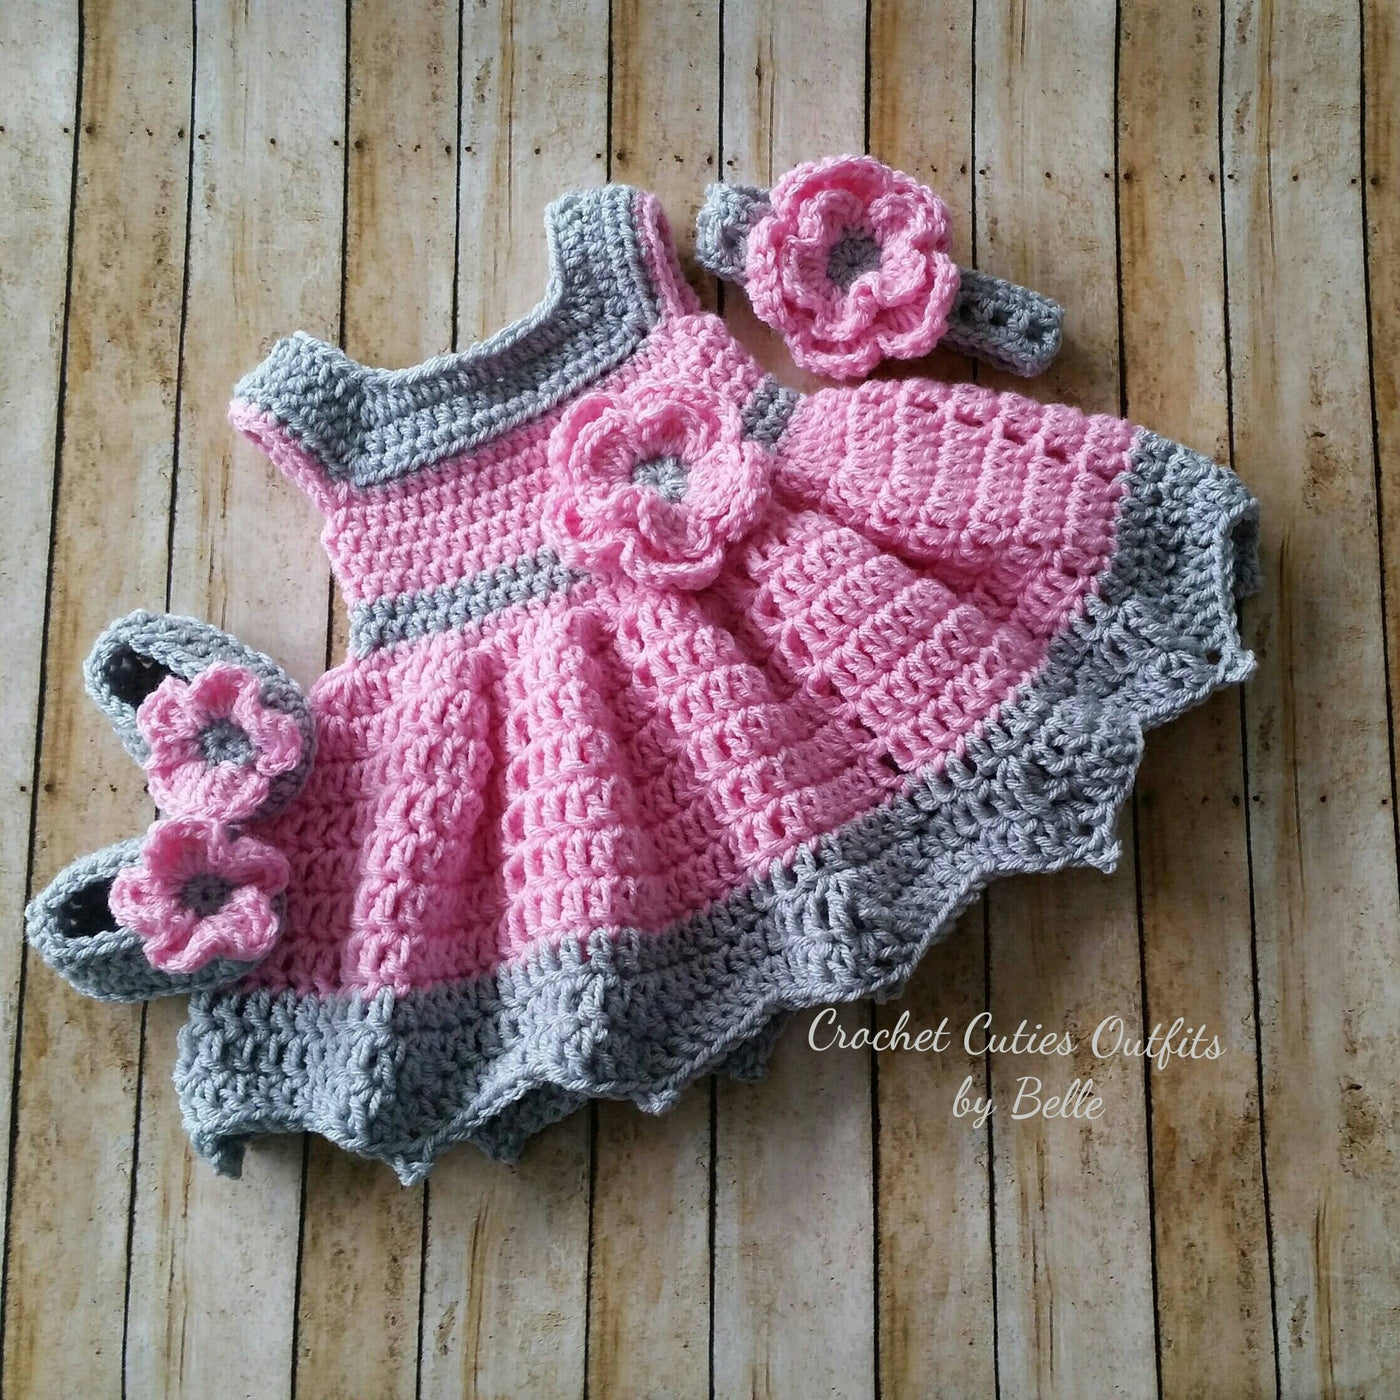 Pink and Gray Crochet Baby Dress, Newborn Baby Dress, Baby Gift, Infant Dress, Coming Home Outfit Vestido de Bebe